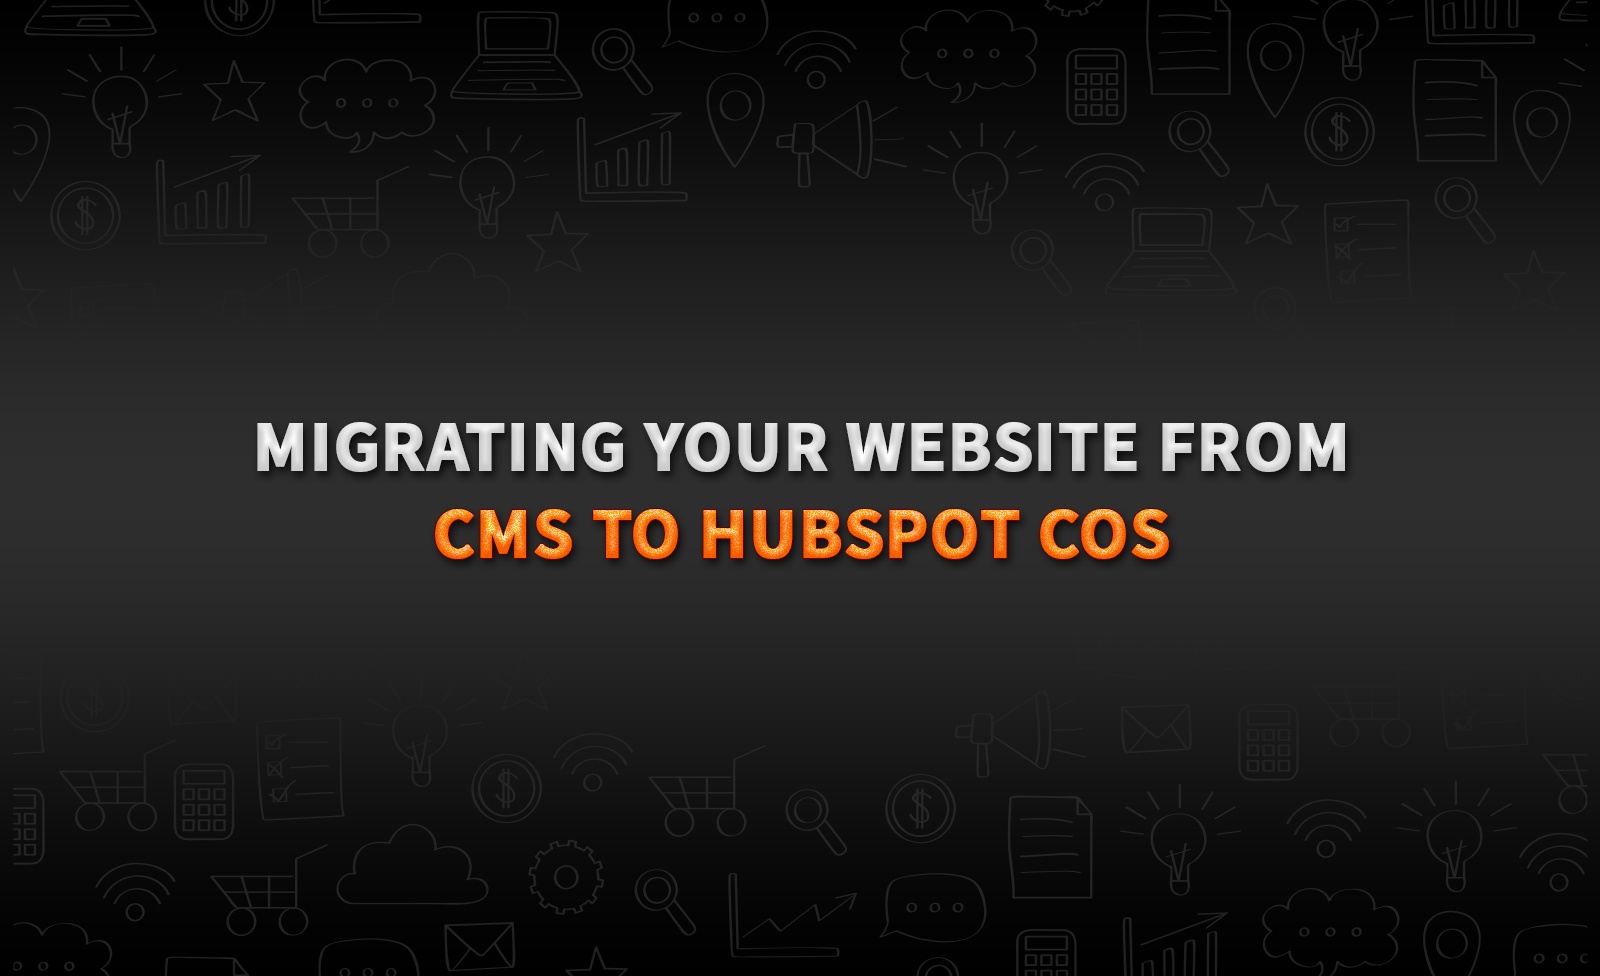 Migrating your website from CMS to Hubspot COS